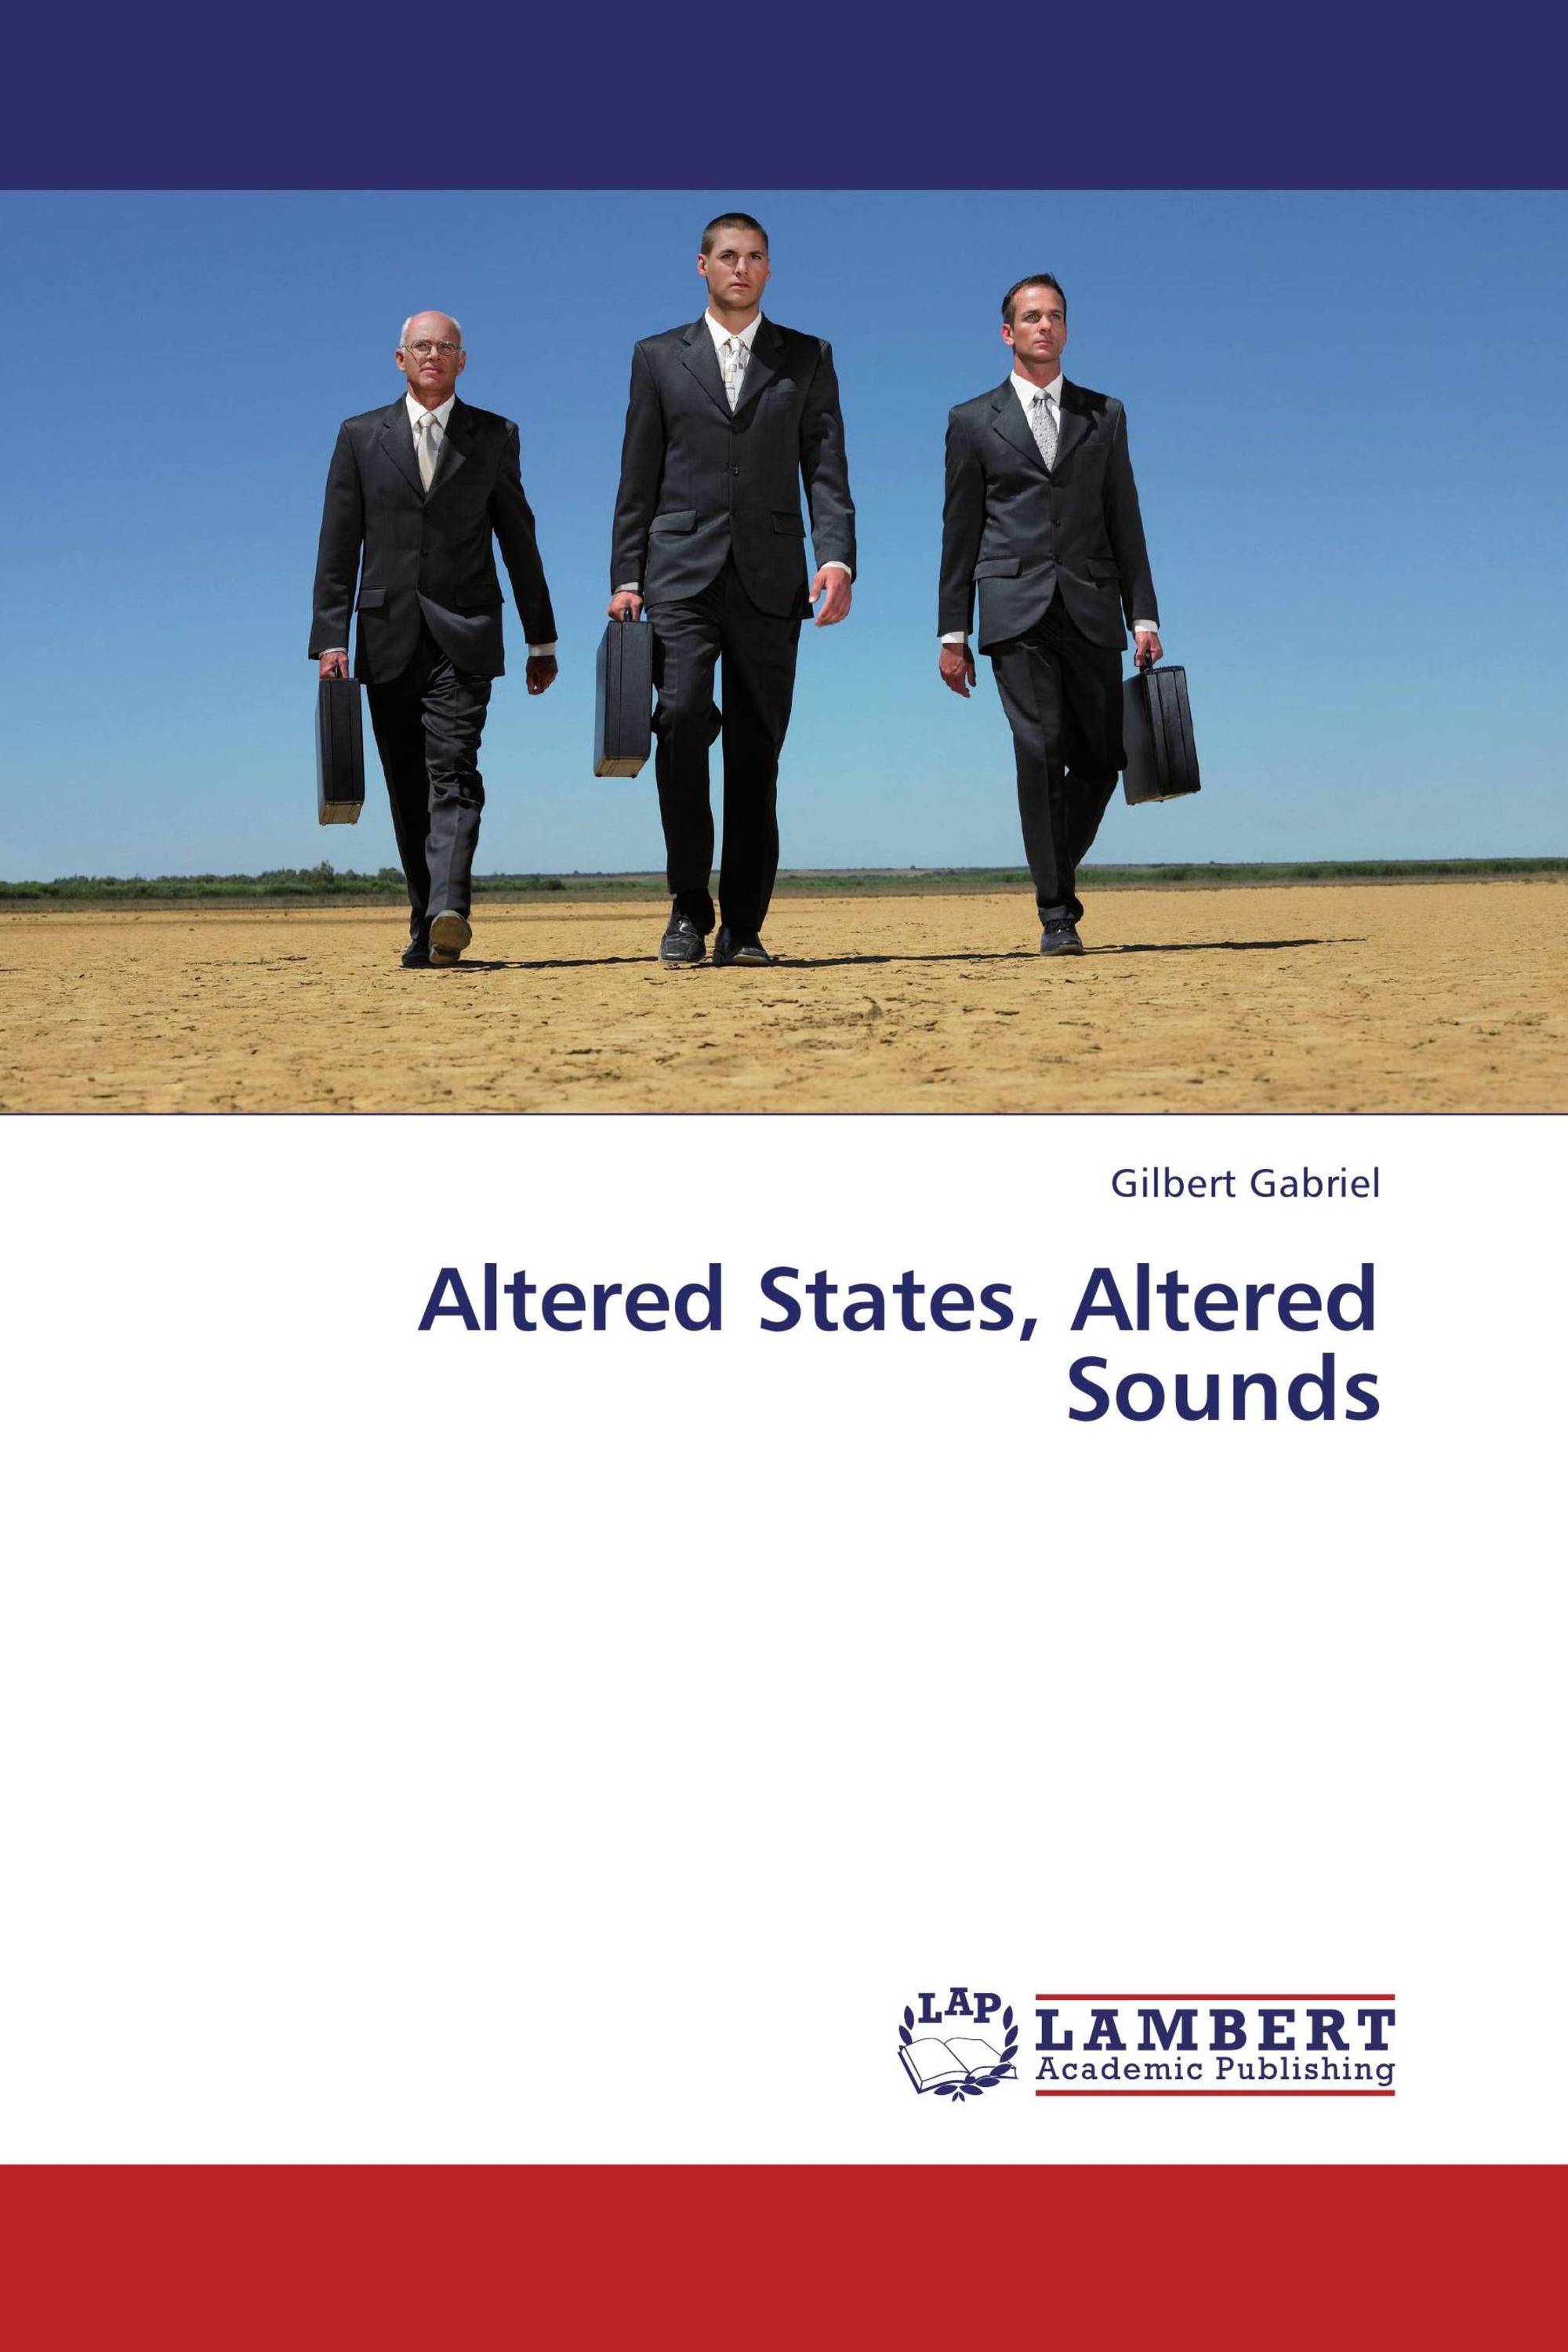 altered state of mind store